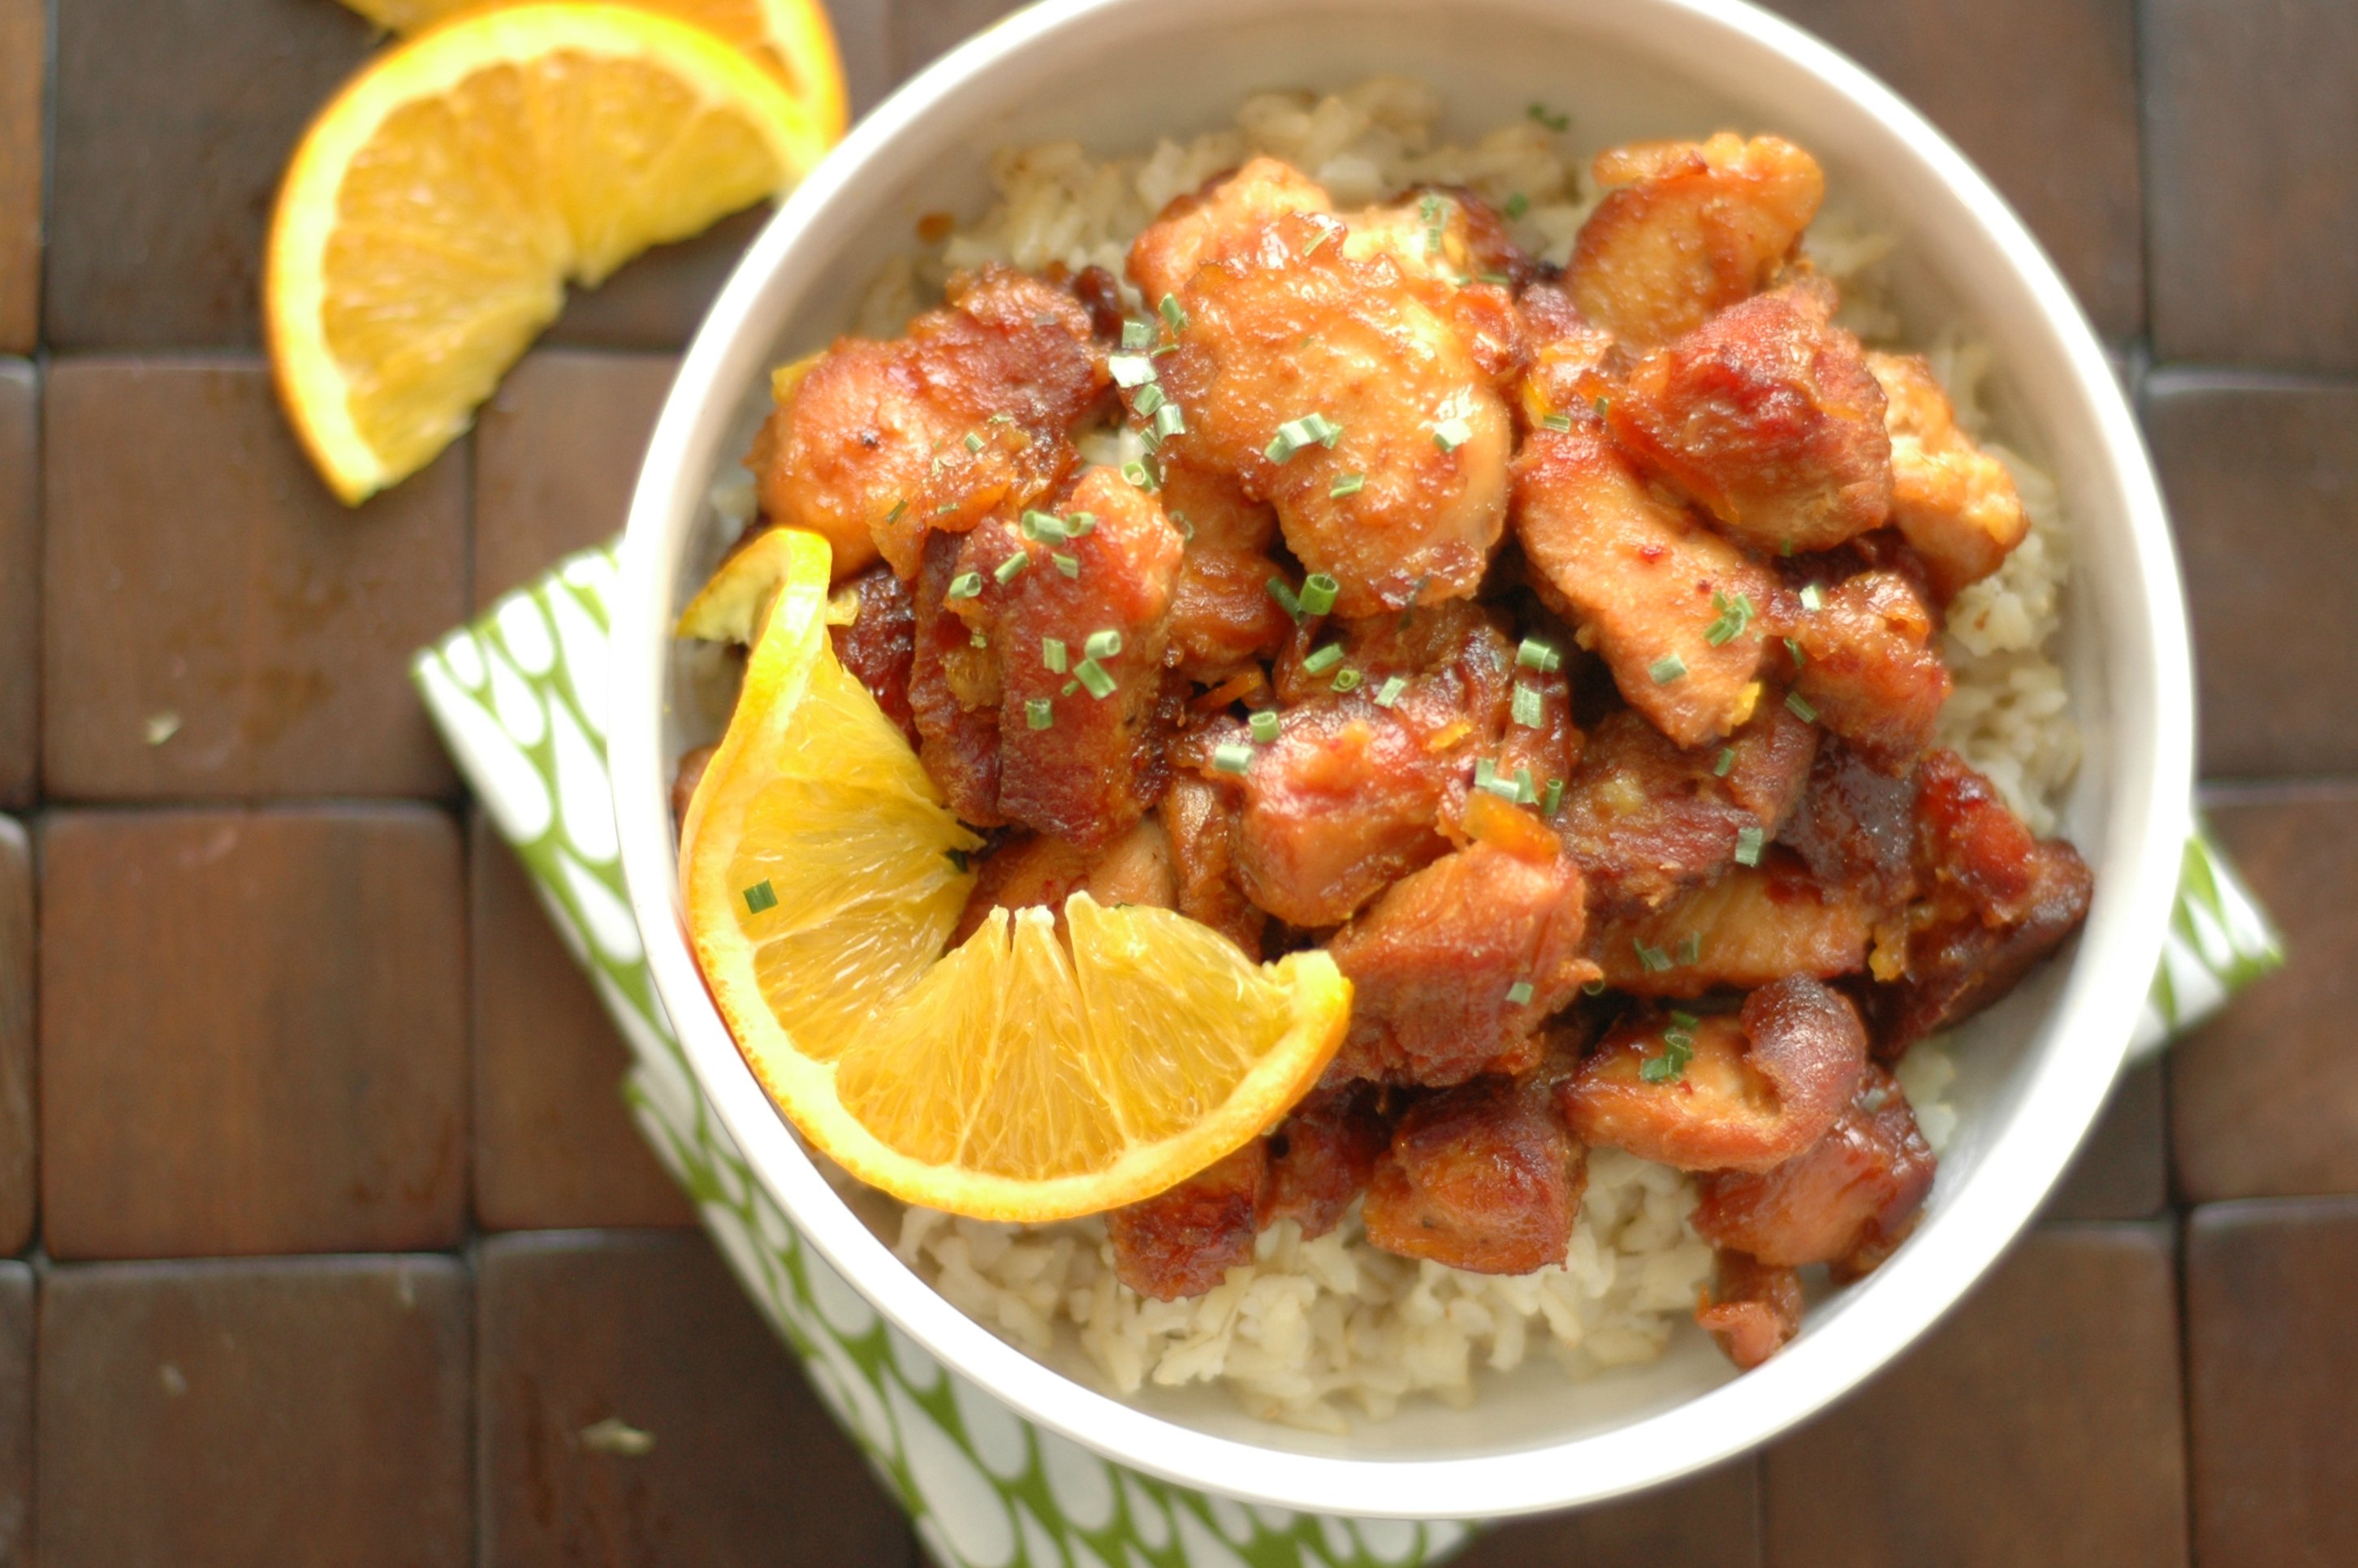 top view of orange chicken on bed of rice with slice of orange